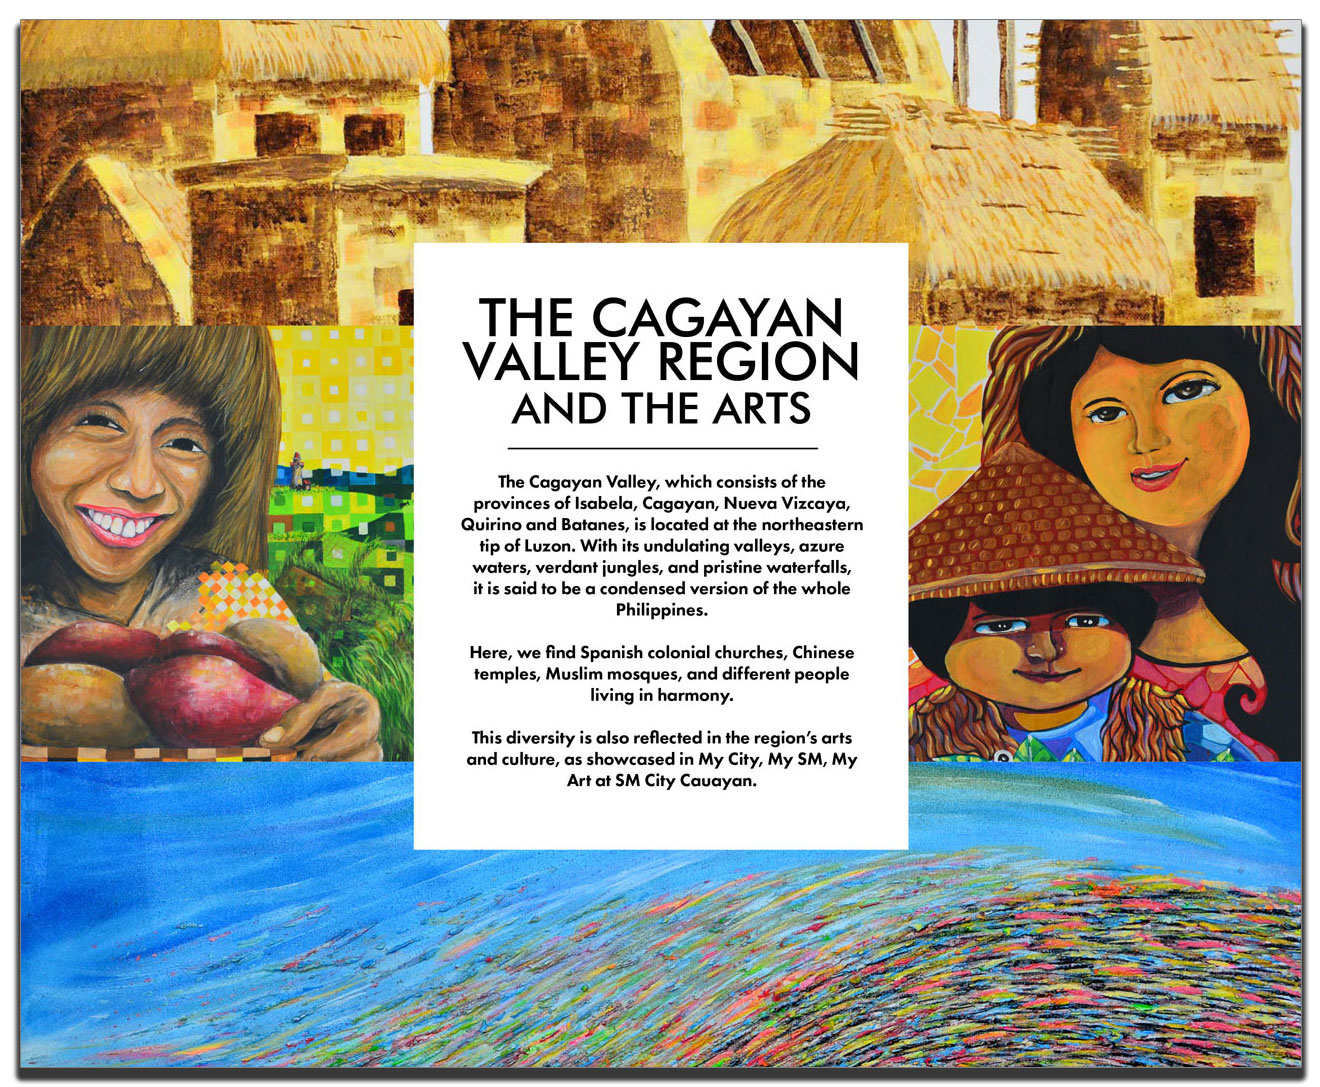 THE CAGAYAN VALLEY REGION AND THE ARTS - My City, My SM, My Art